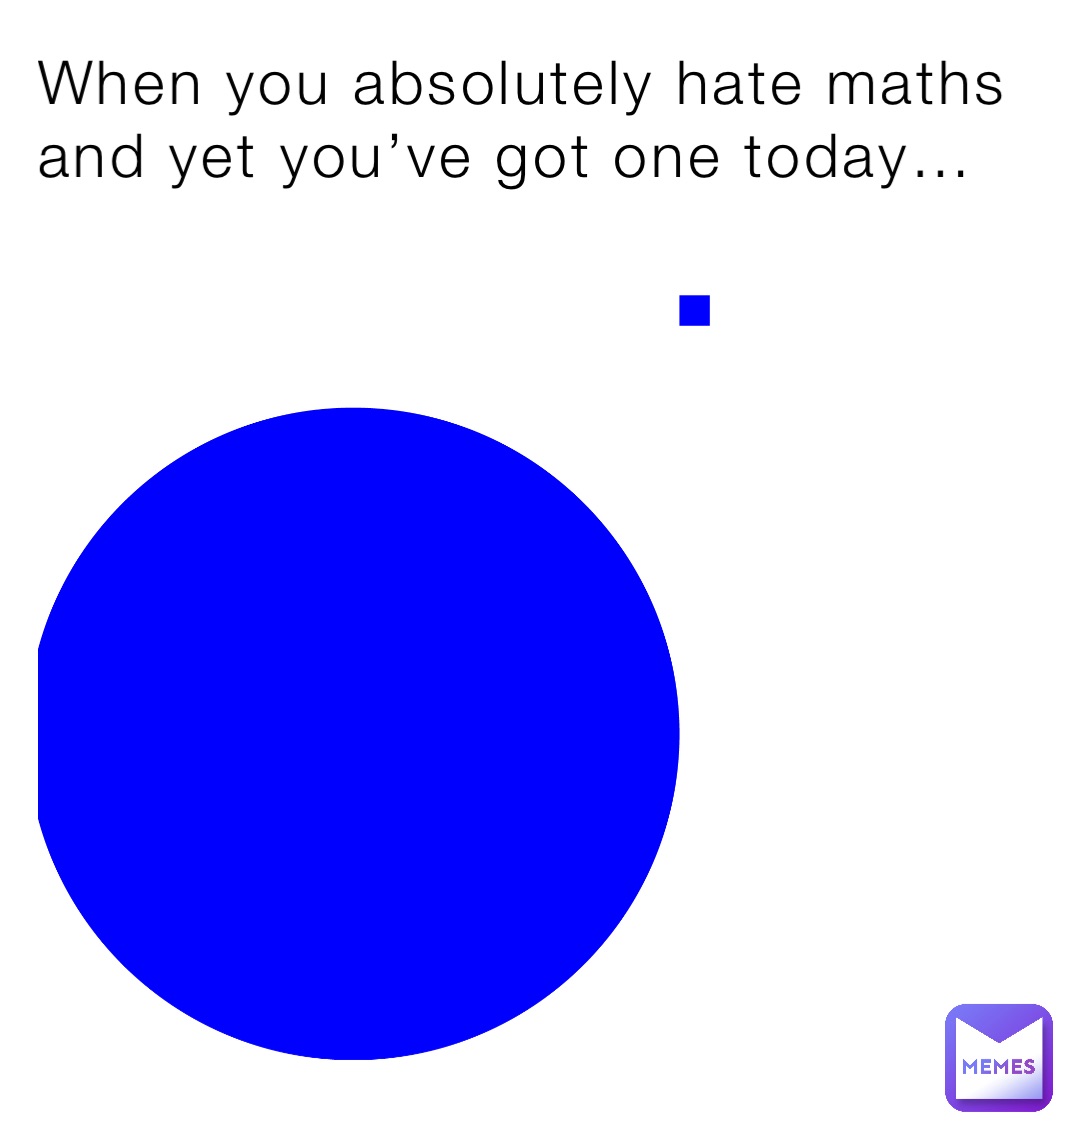 When you absolutely hate maths and yet you’ve got one today…